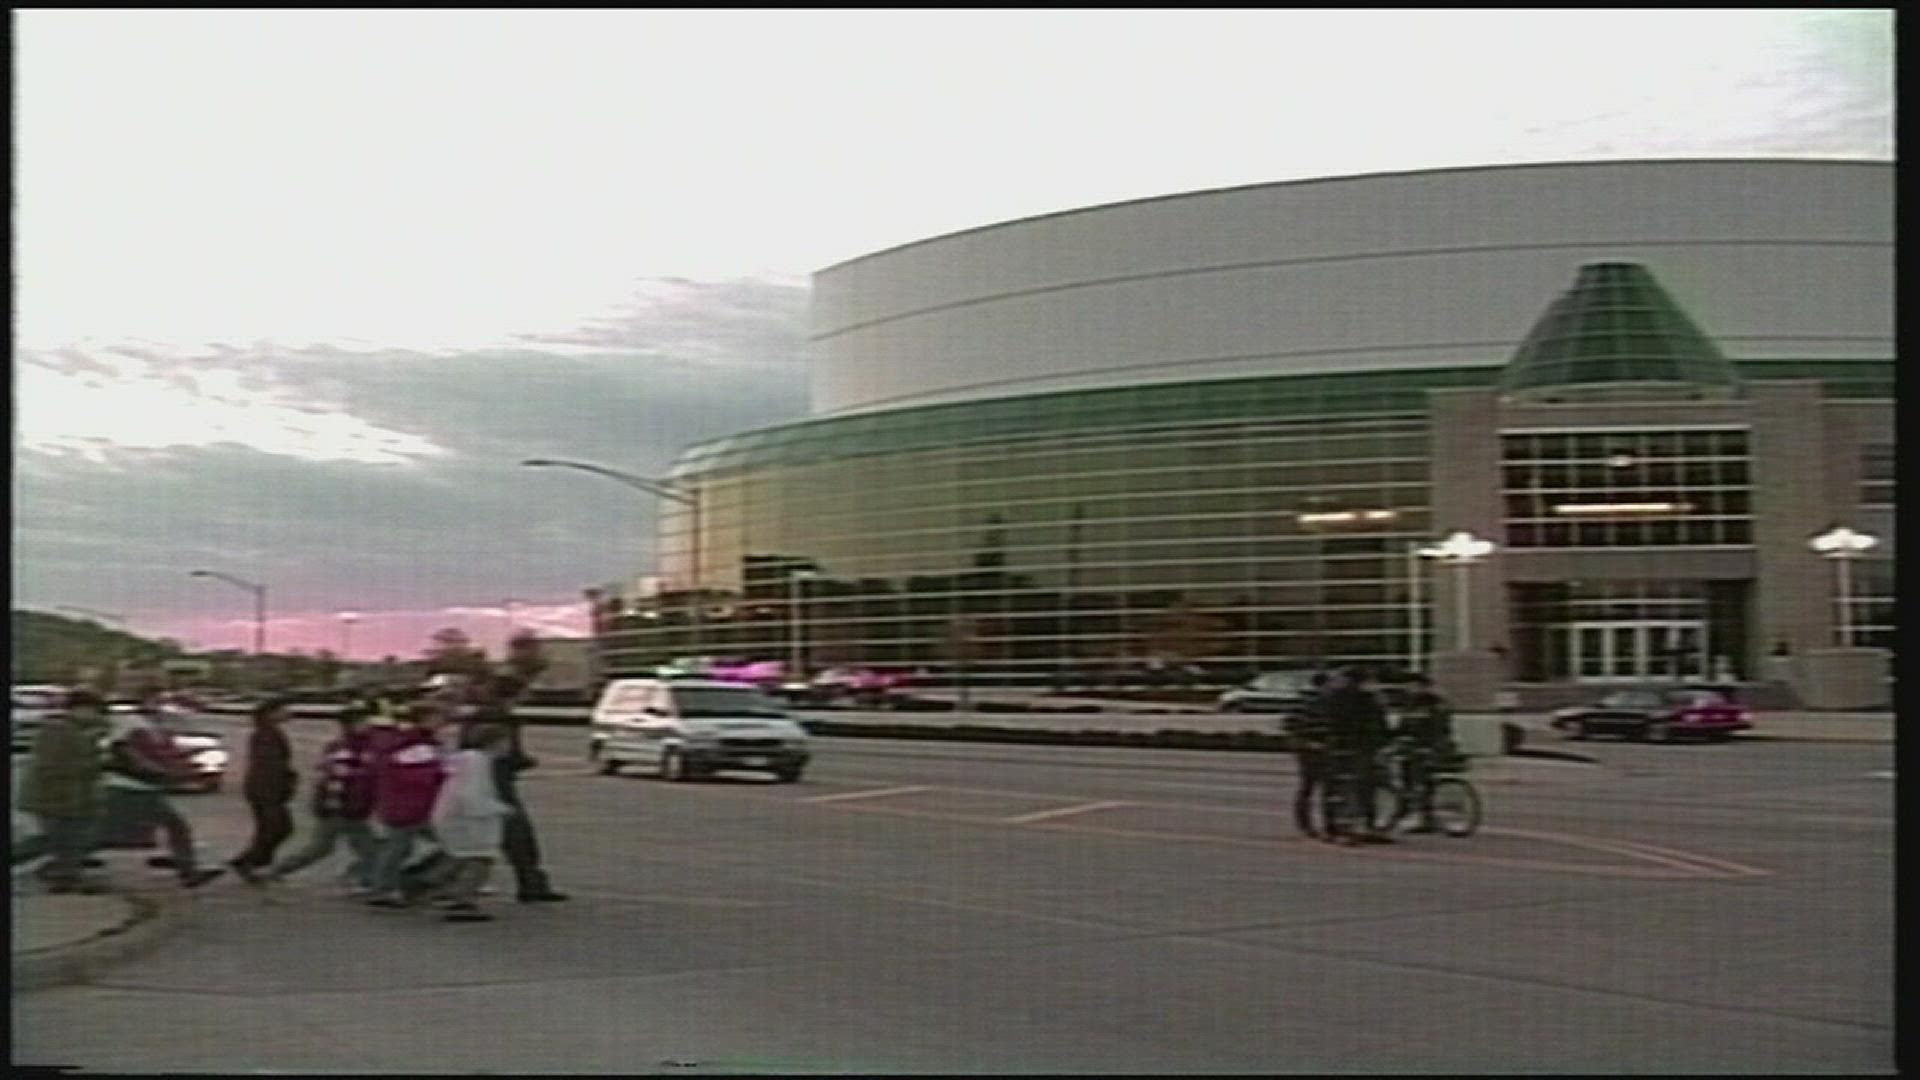 The Quad City Mallards professional hockey franchise debuted to an excited home crowd October 1995 at The Mark of the Quad Cities.